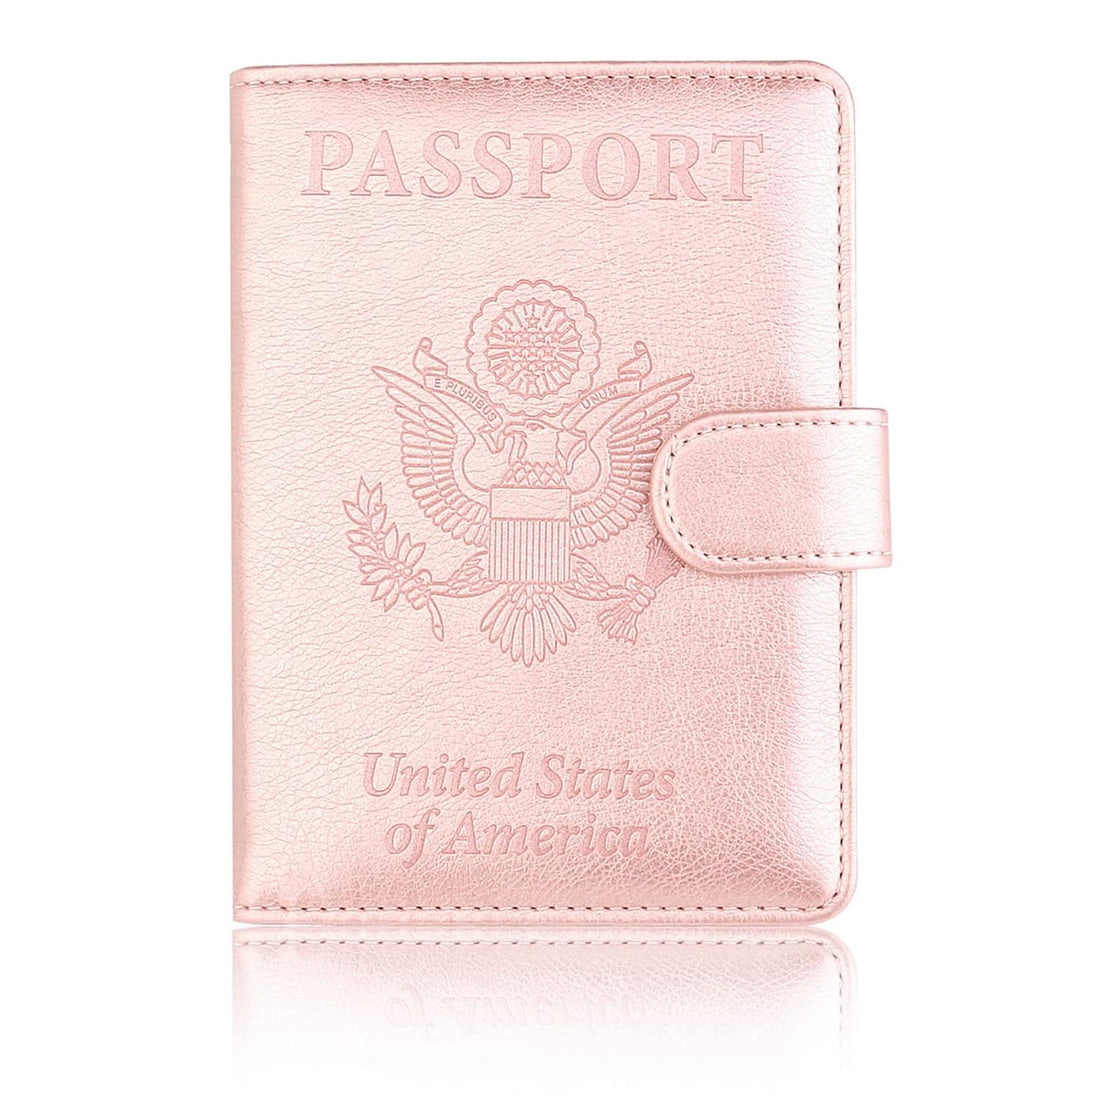 TOURSUIT RFID Passport and Vaccine Card Holder Combo, Travel Document Holder Case Cover, Leather Travel Passport Wallet Organizer Women with Vax Vaccination Card Protector Slot, Rose Gold, Buckle Closure